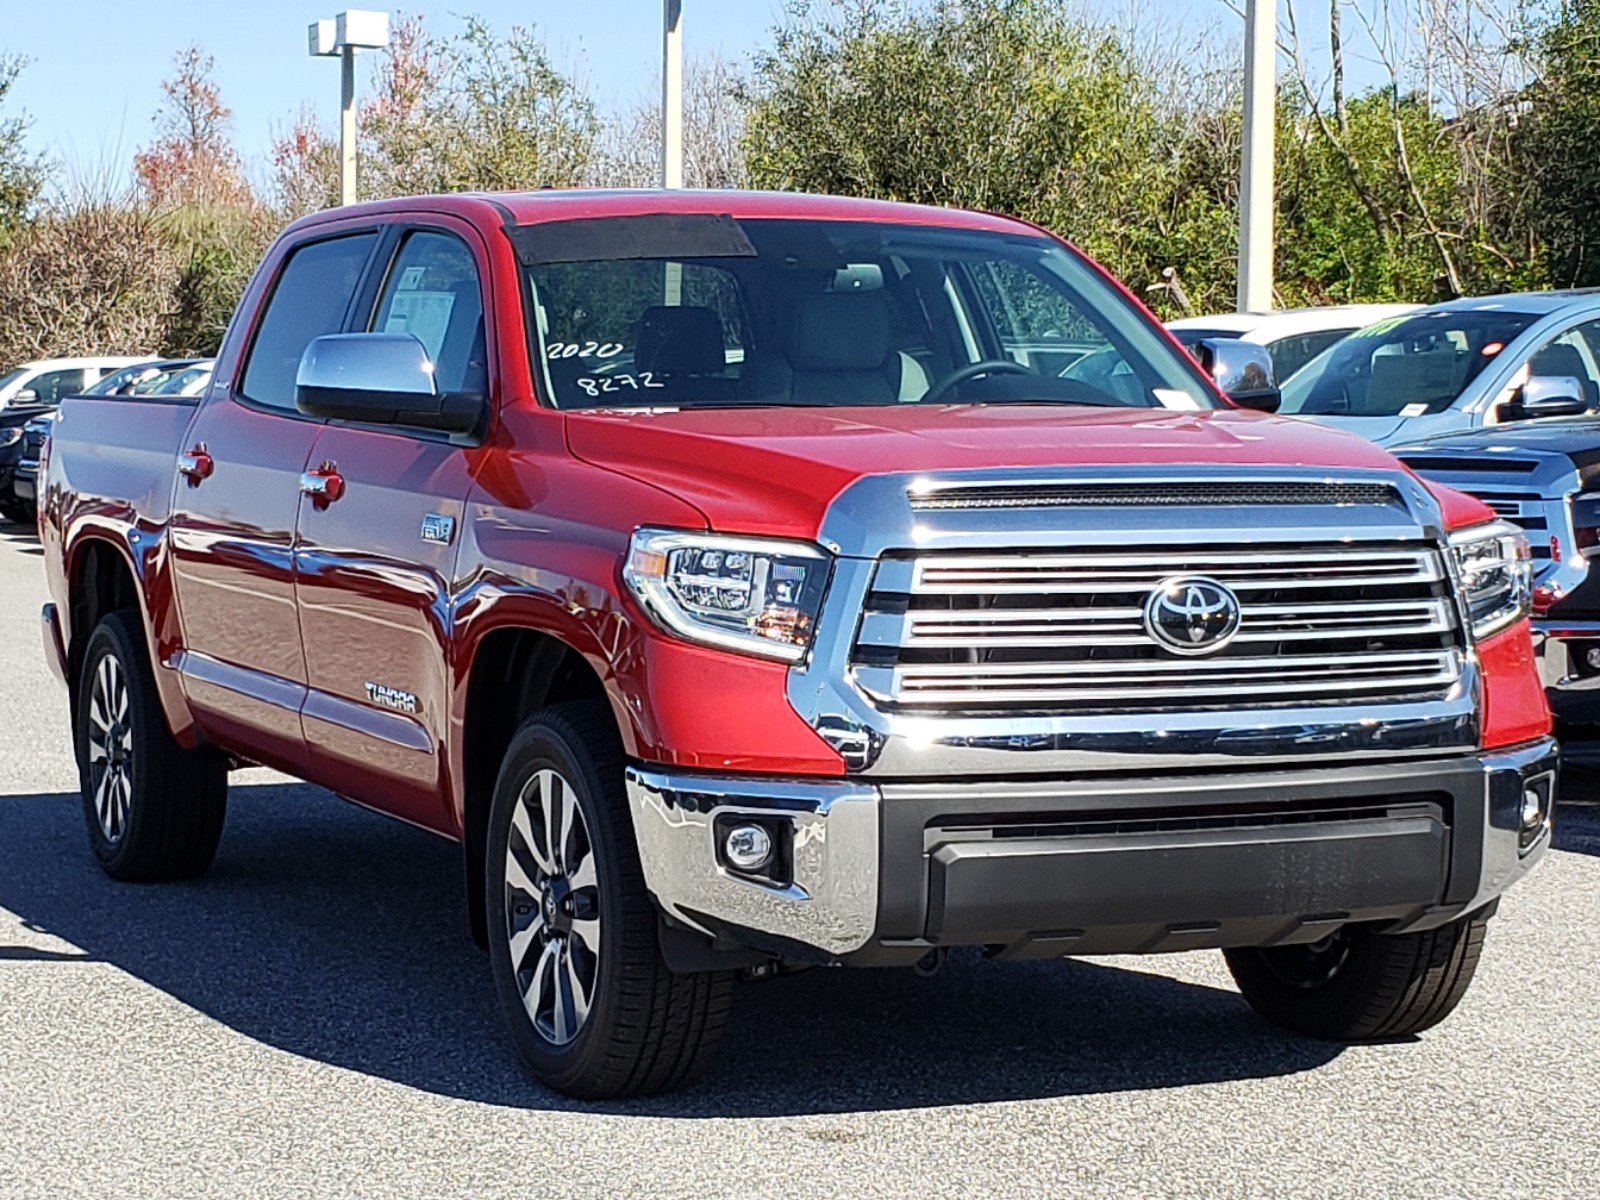 New 2020 Toyota Tundra Limited CrewMax in Orlando #0820001 | Toyota of